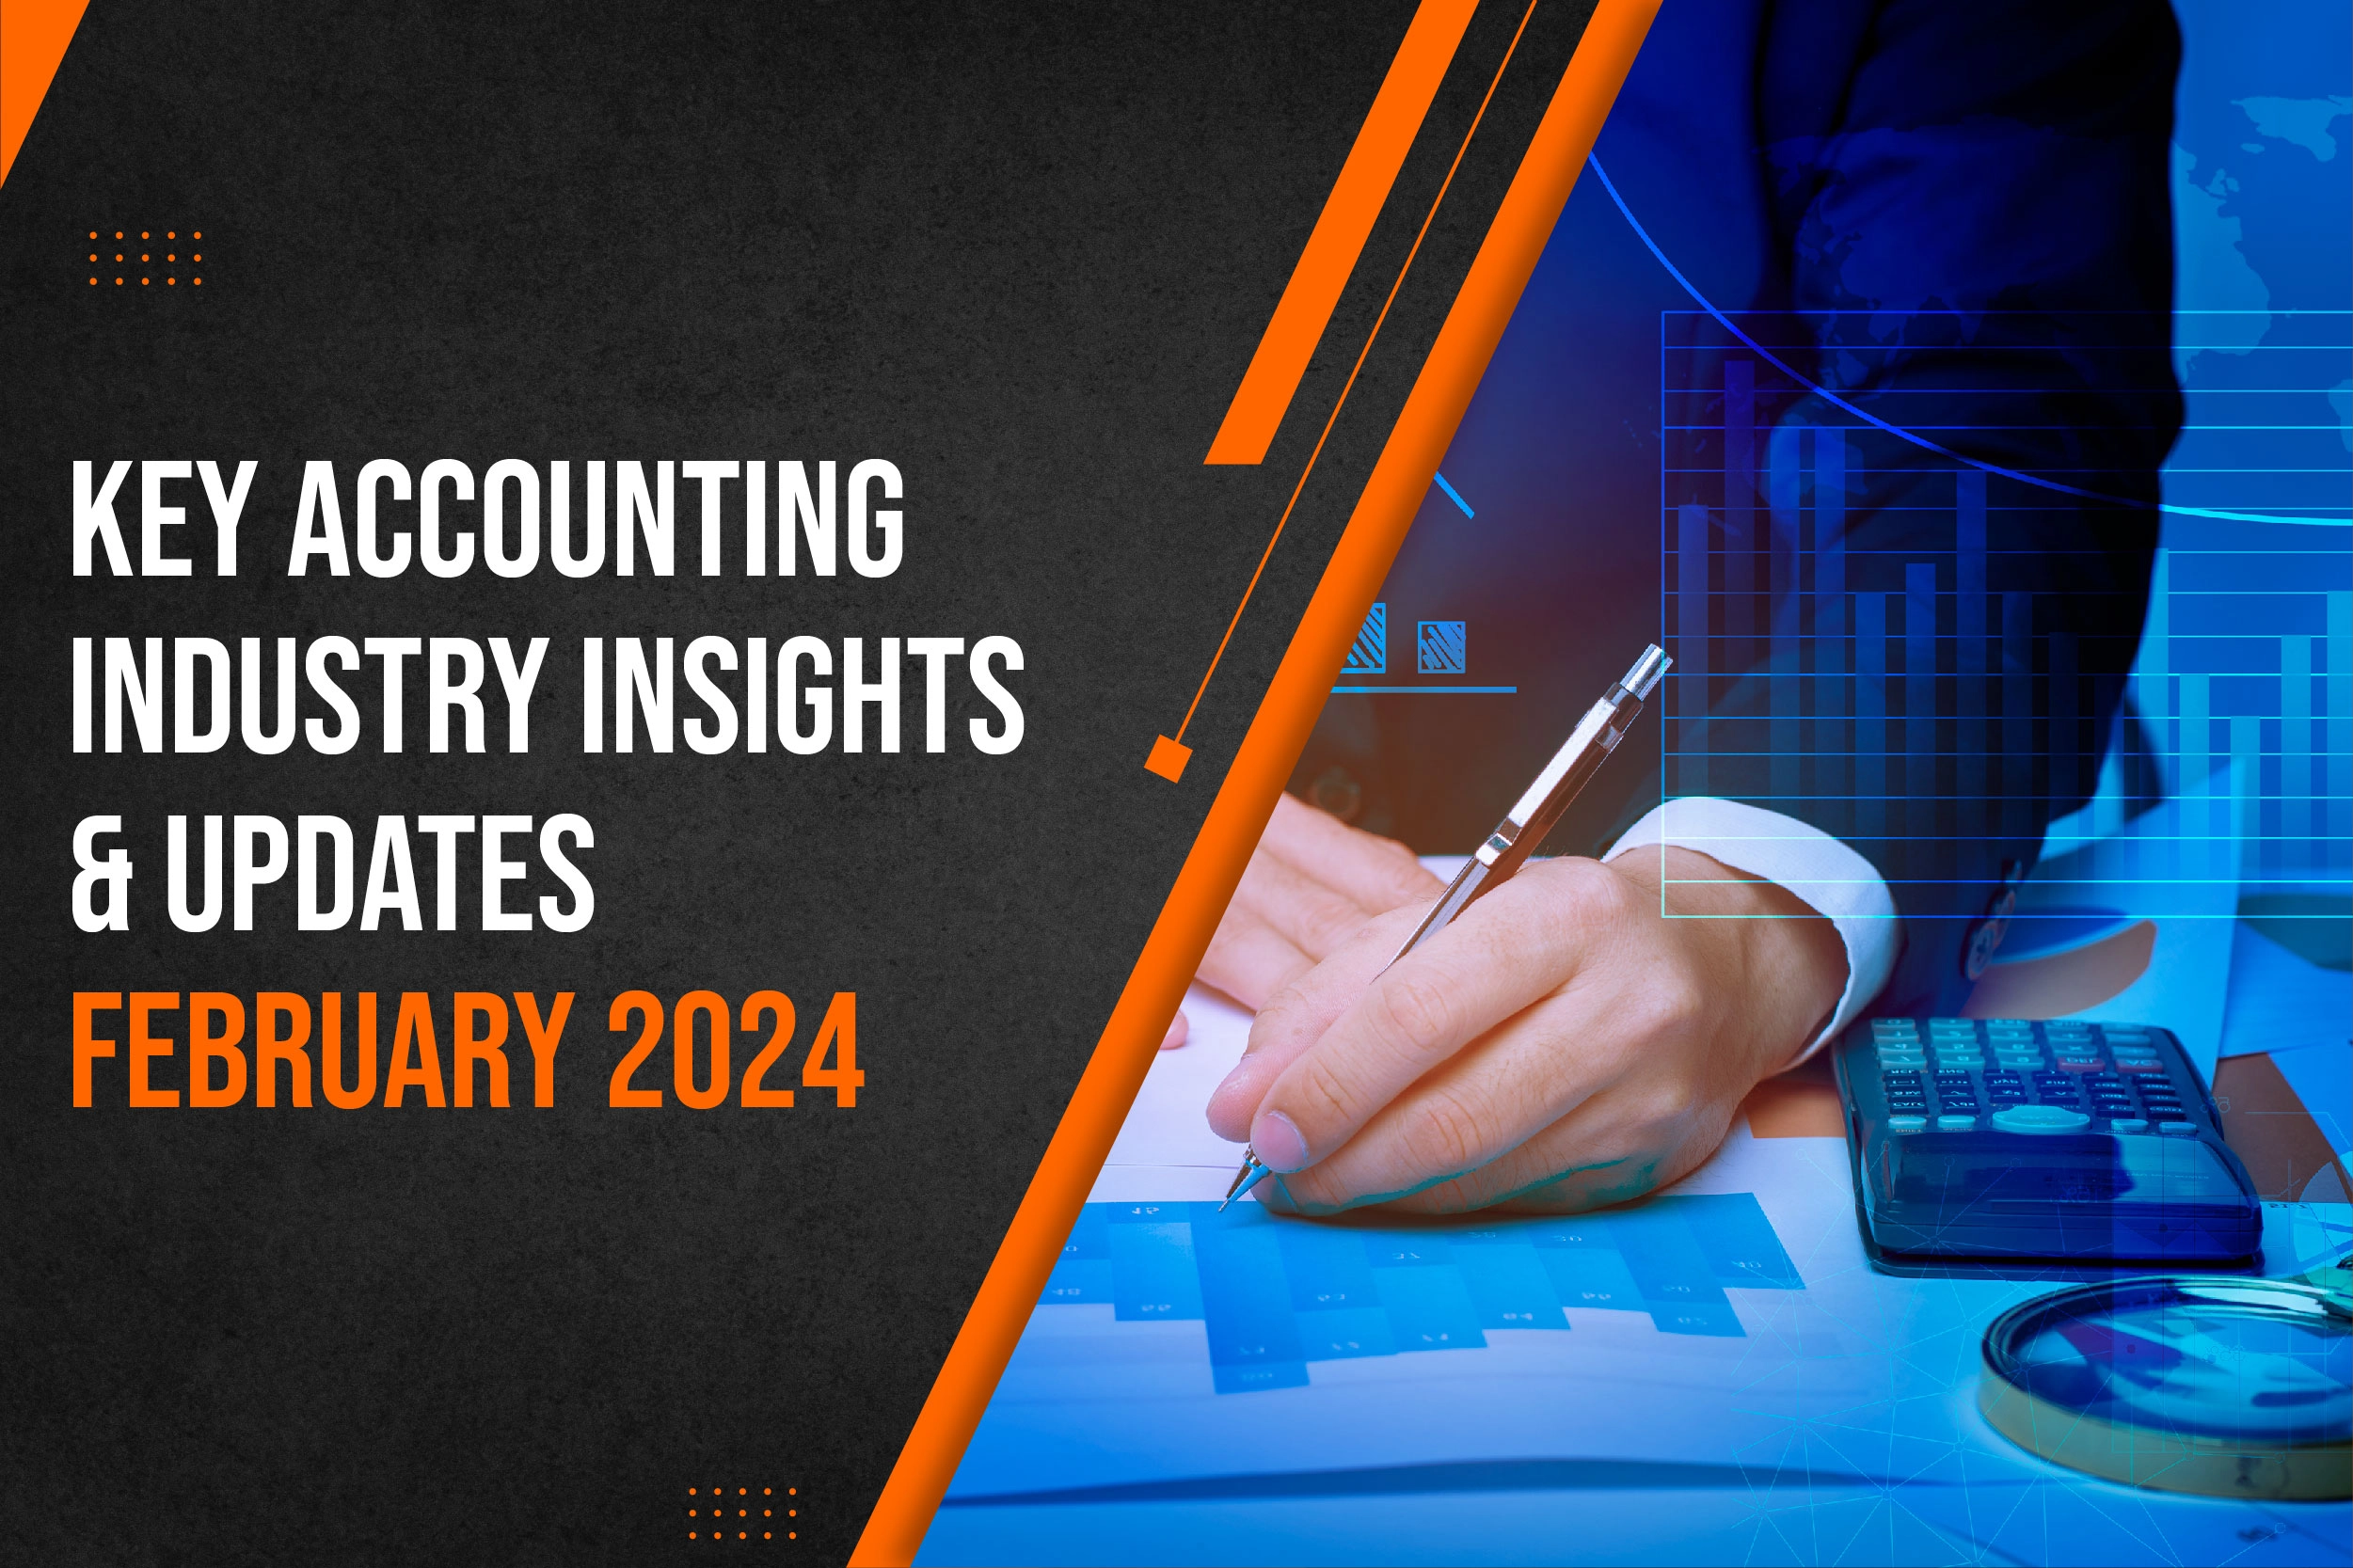 KEY ACCOUNTING INDUSTRY INSIGHTS AND UPDATES – FEBRUARY 2024